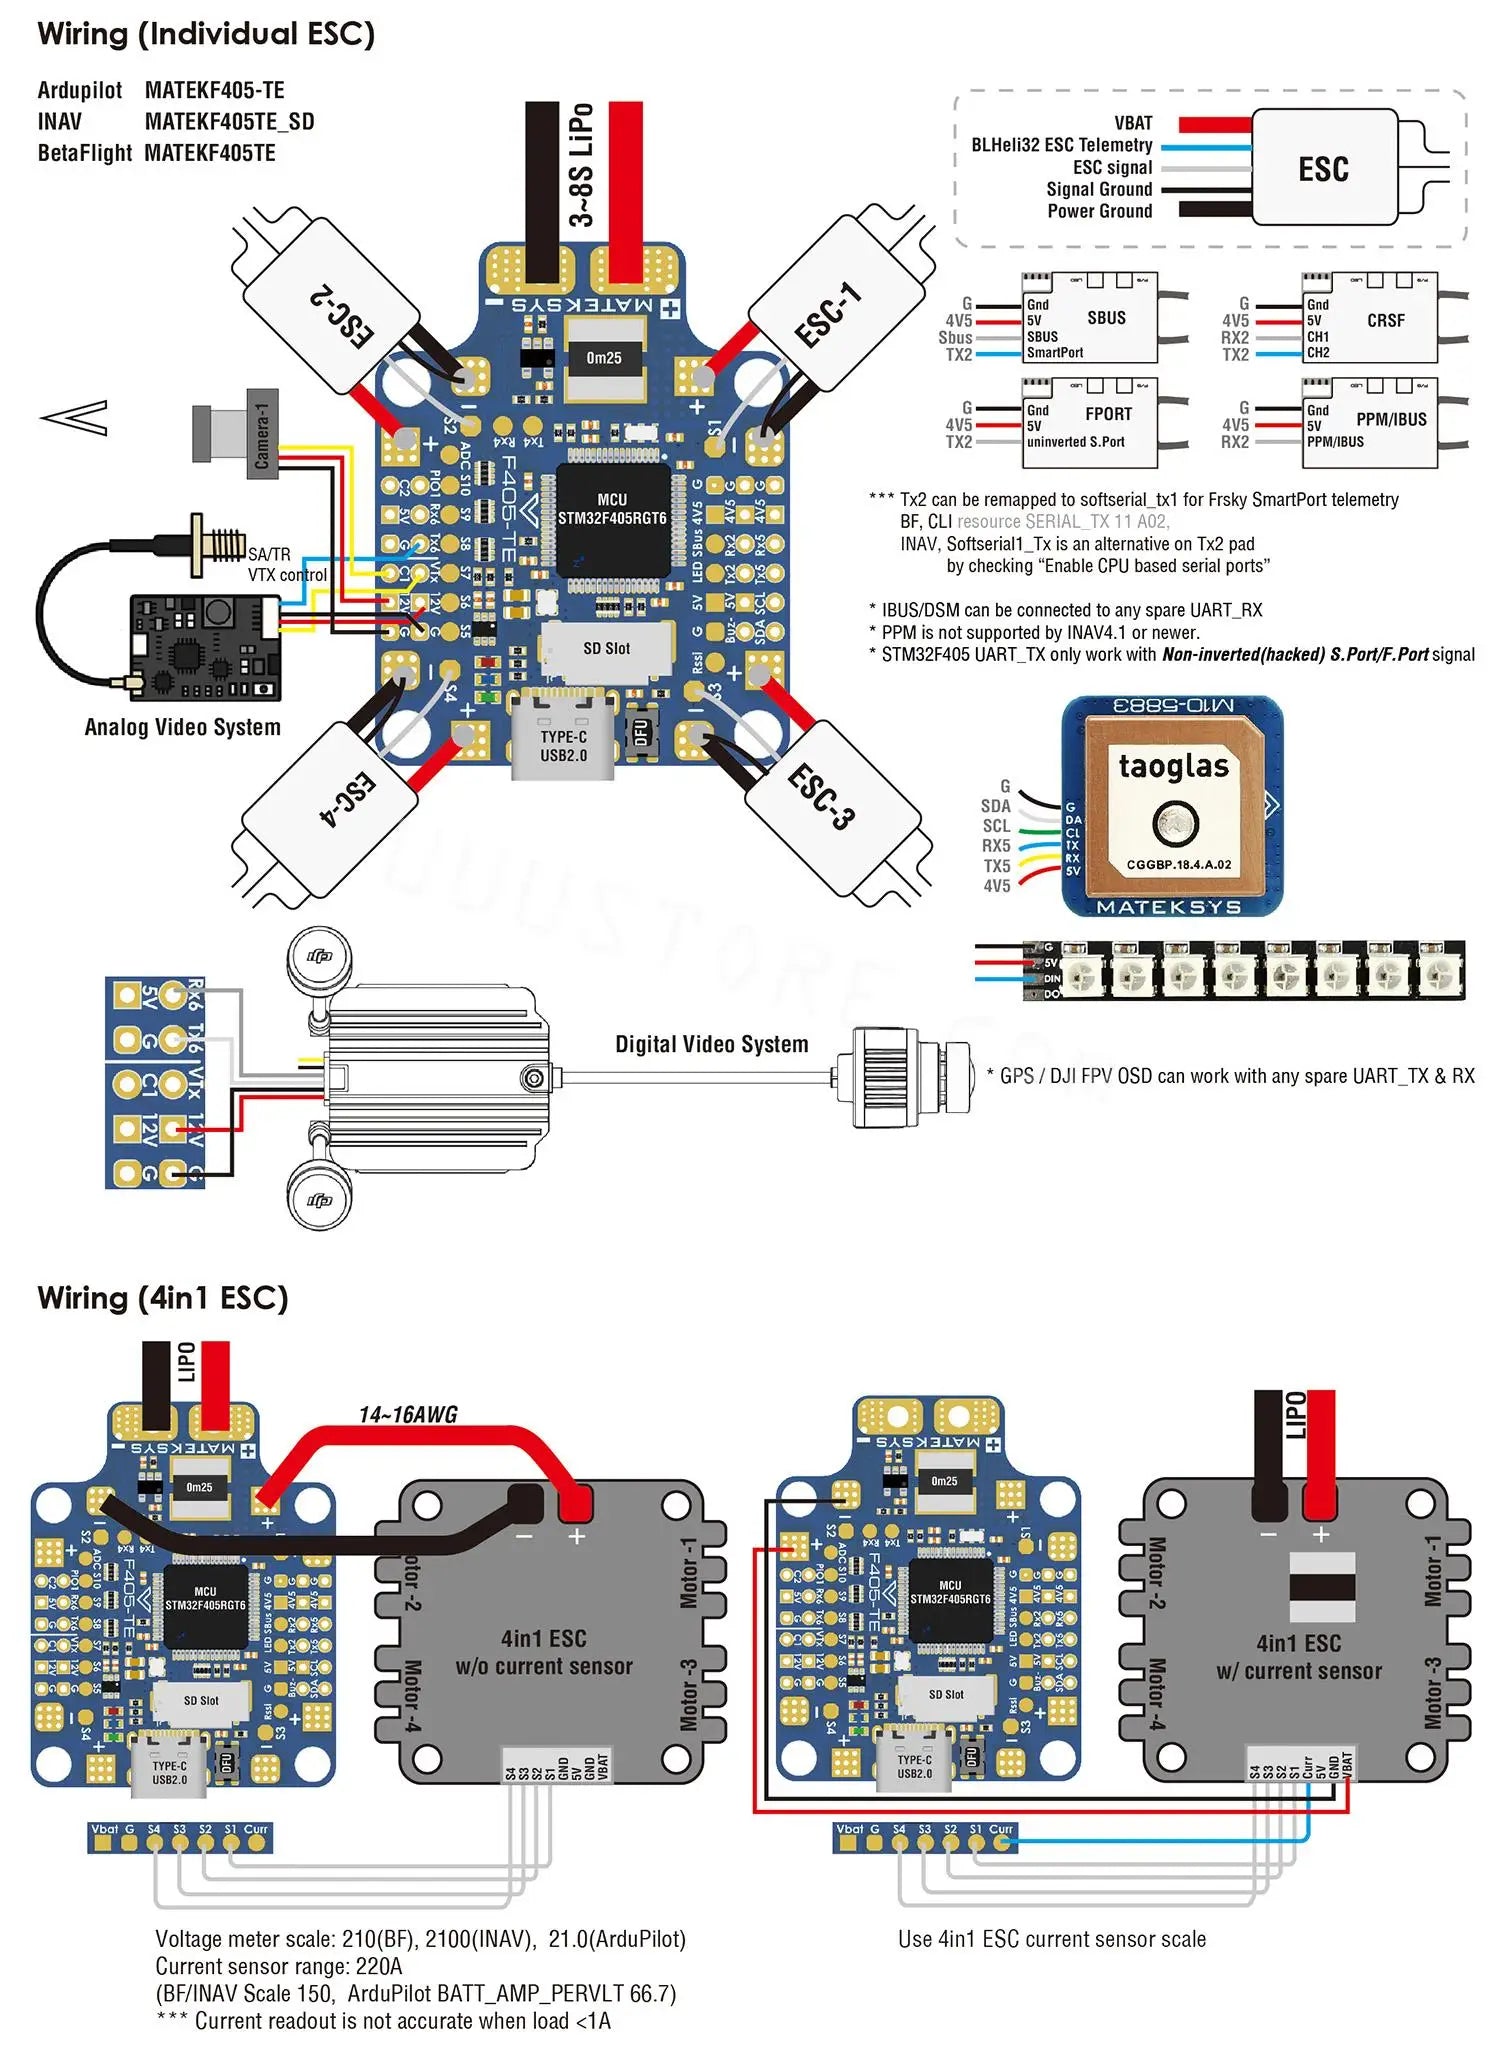 MATEK F405-TE Flight Controller Baro OSD, 5 IBUSIDSM can be connected to any spare UART_RX PPM